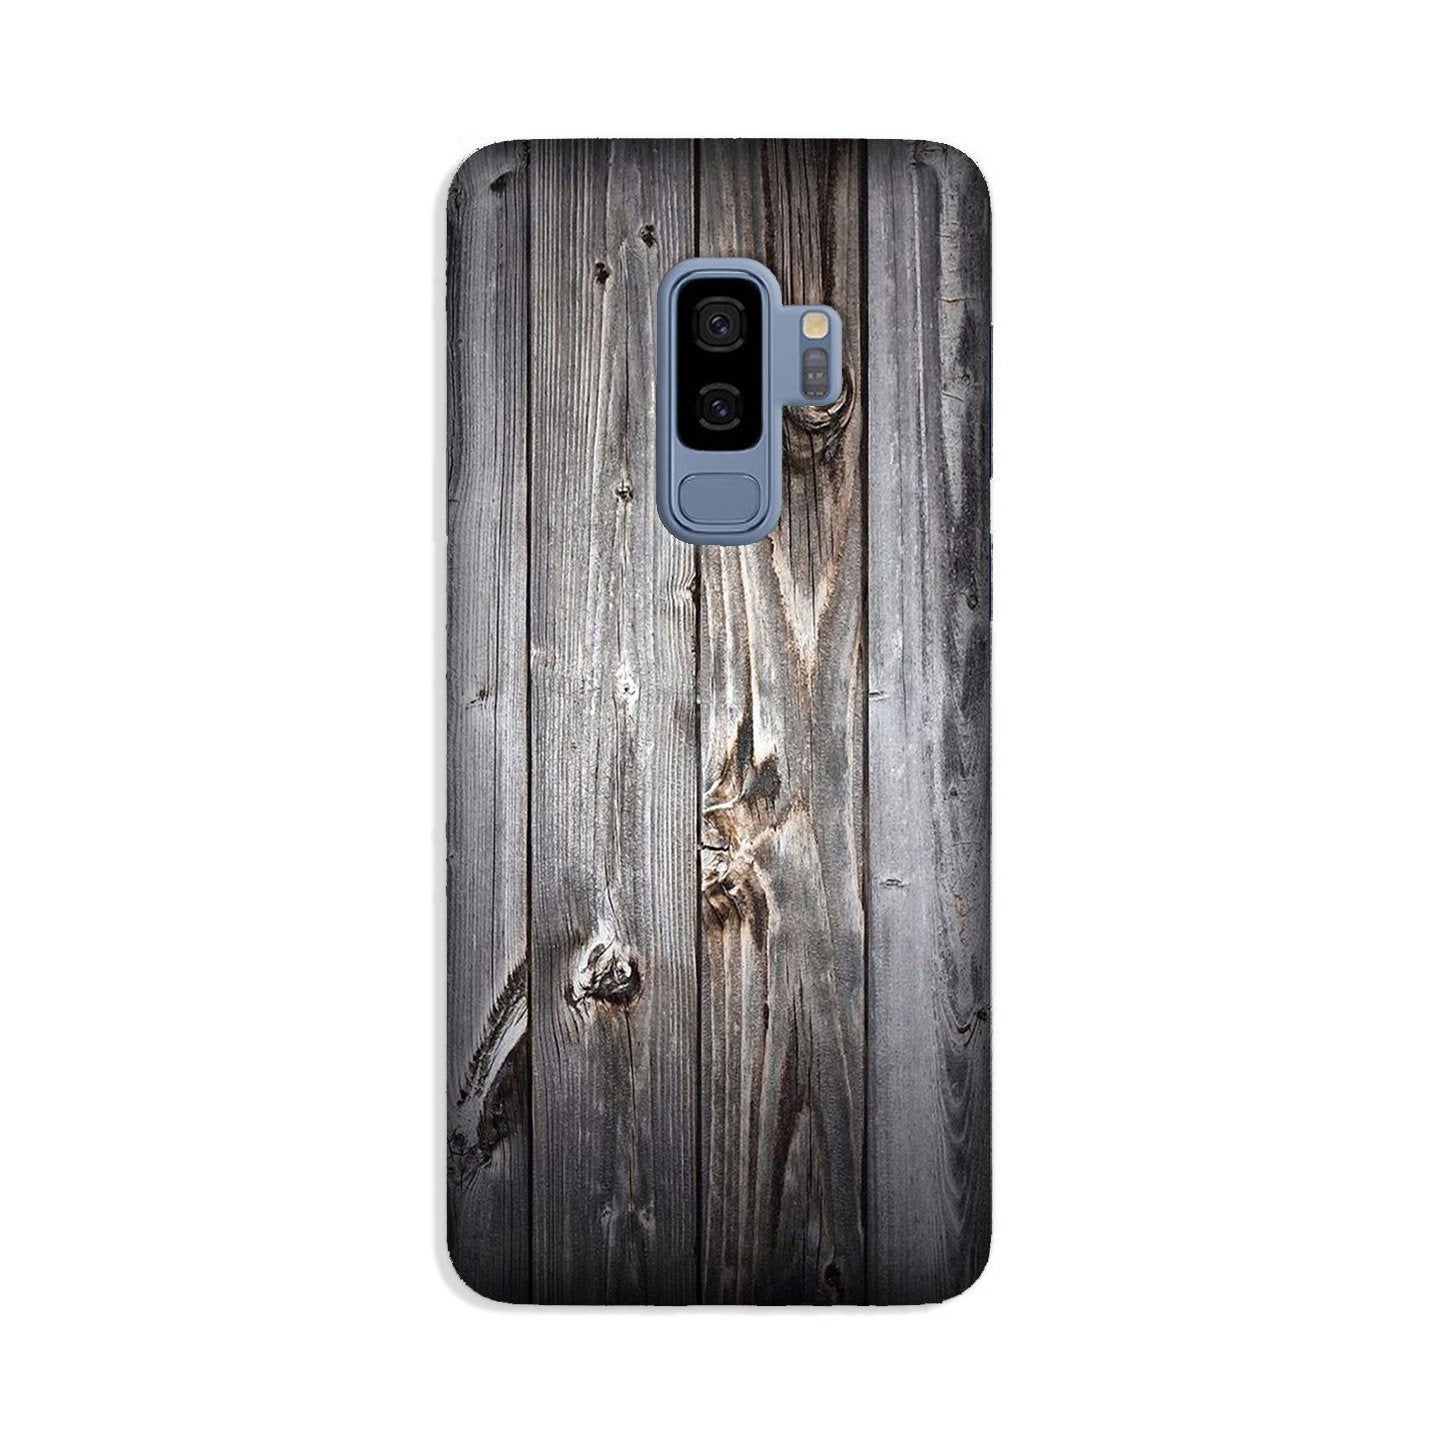 Wooden Look Case for Galaxy S9 Plus(Design - 114)